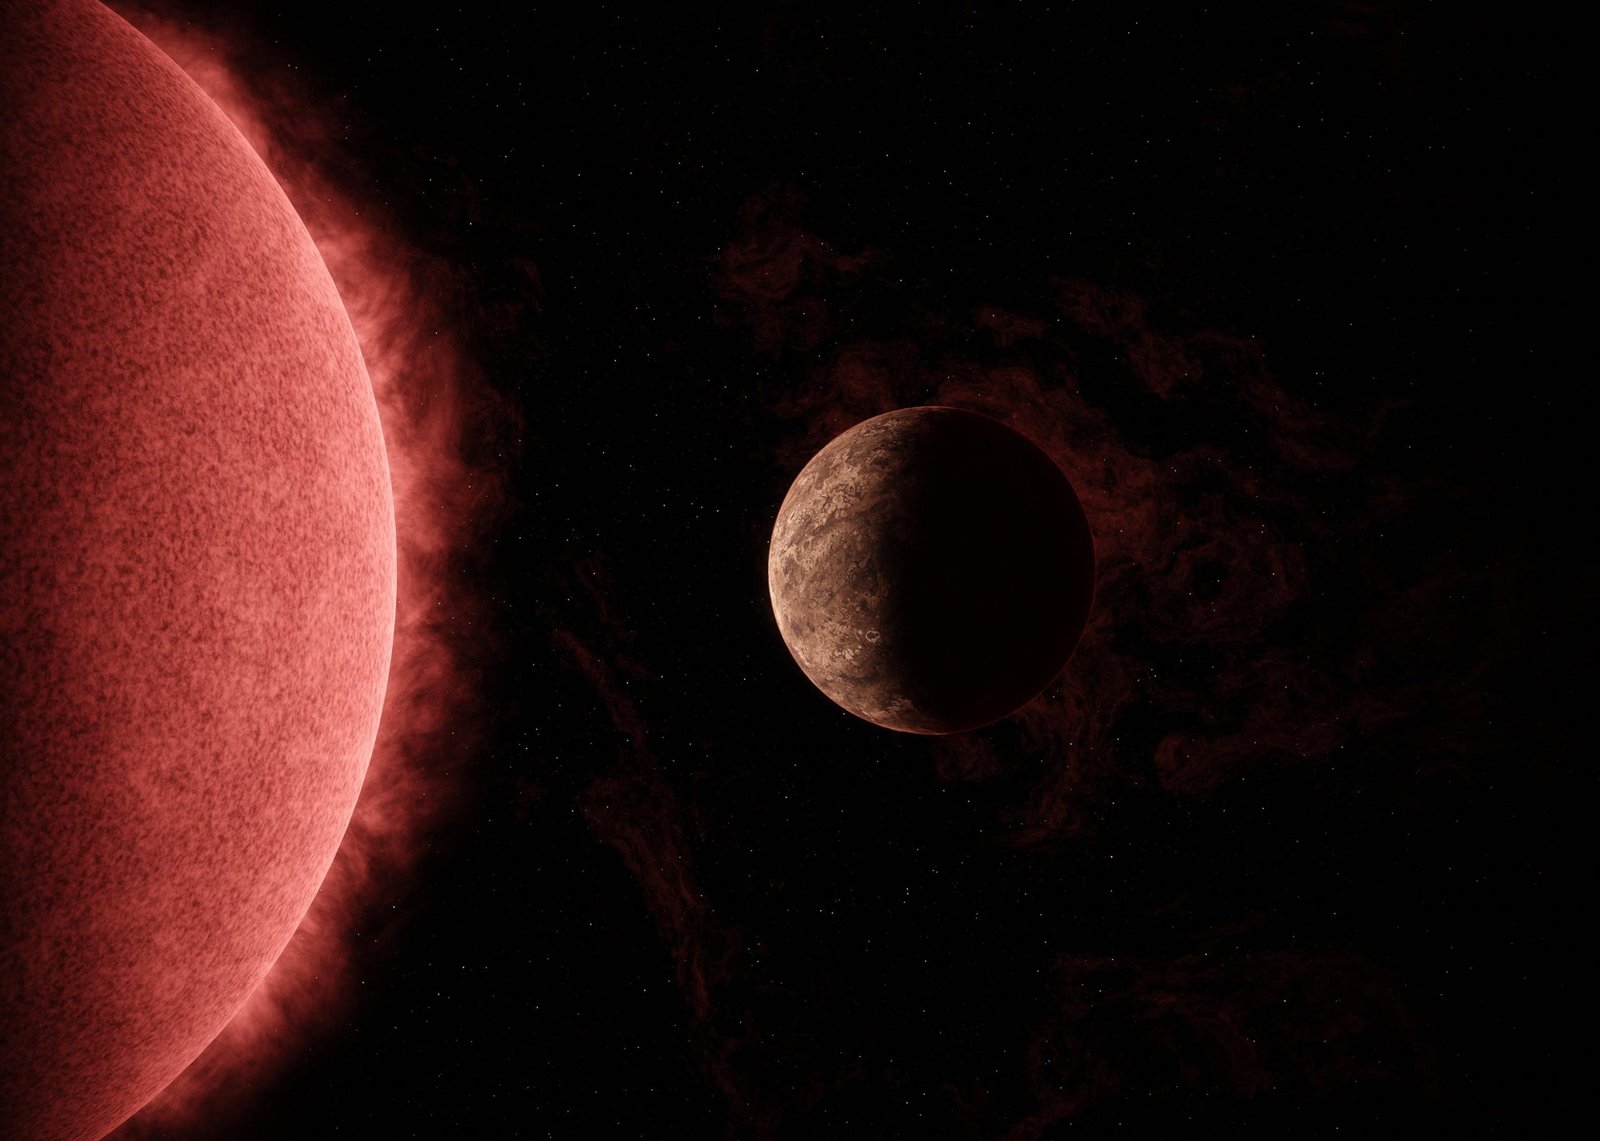 Network of Robotic Telescopes Finds New Earth-Sized World Orbiting an Ultra-Cool Star